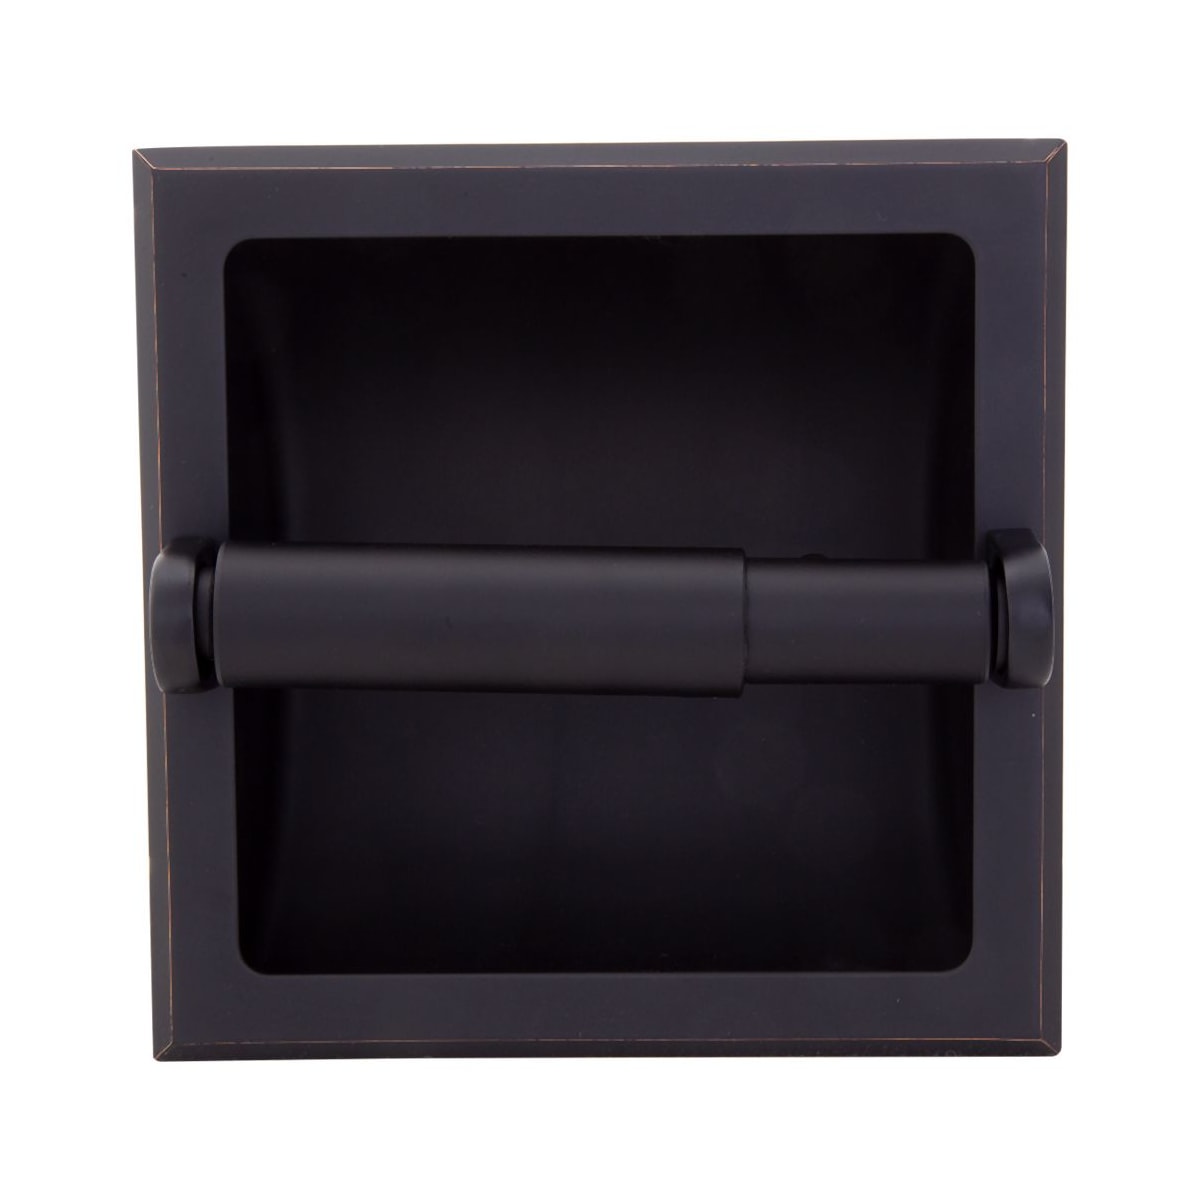 Design House 539254 Oil Rubbed Bronze Recessed Toilet